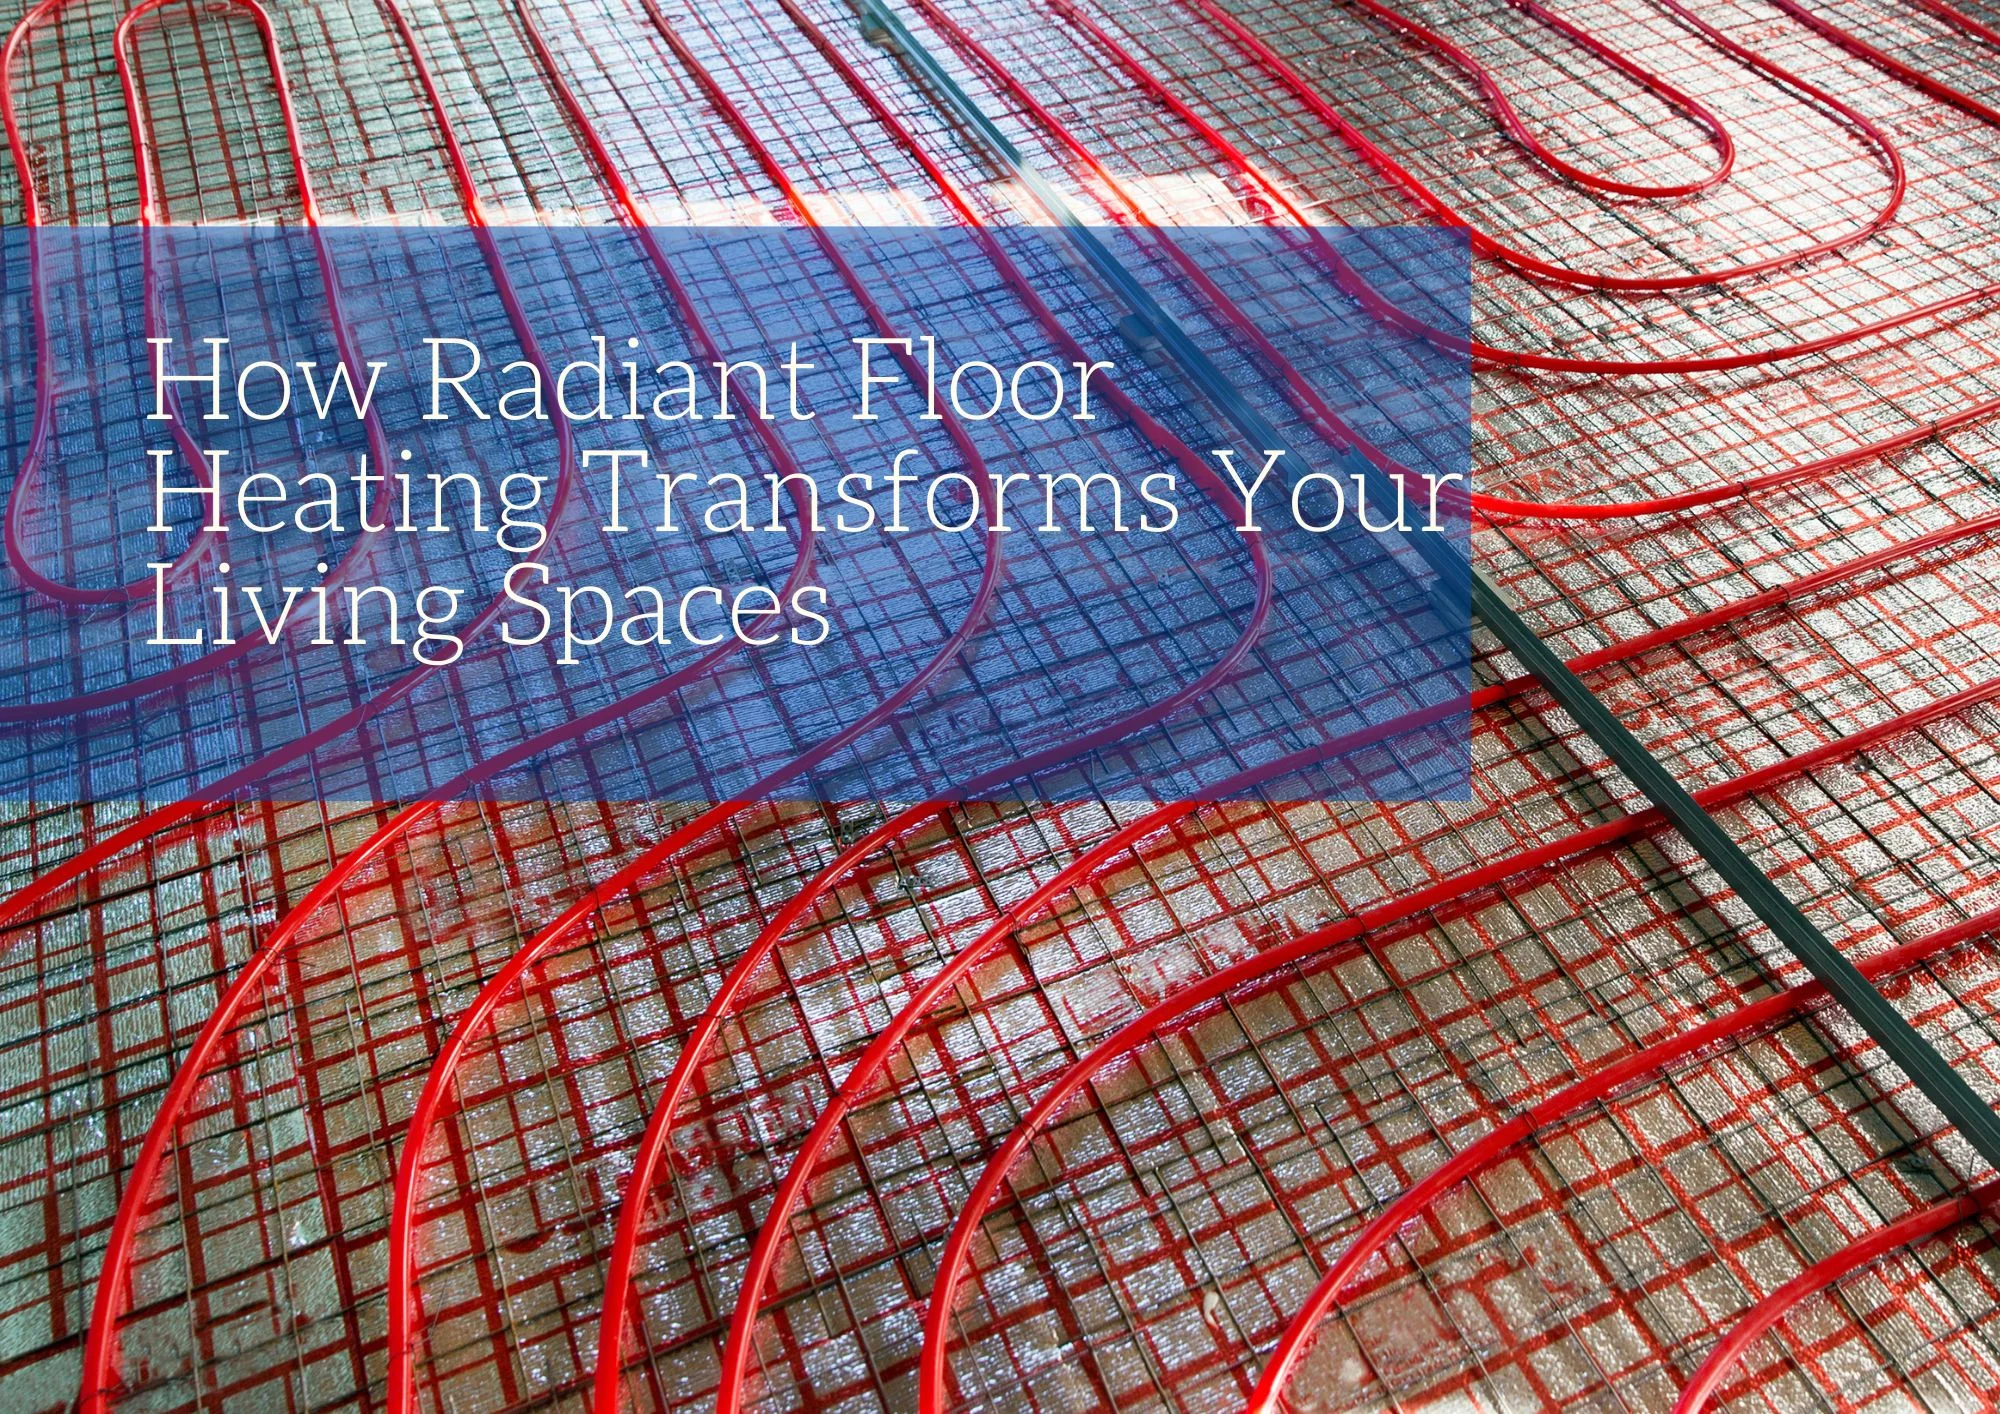 How Radiant Floor Heating Transforms Your Living Spaces